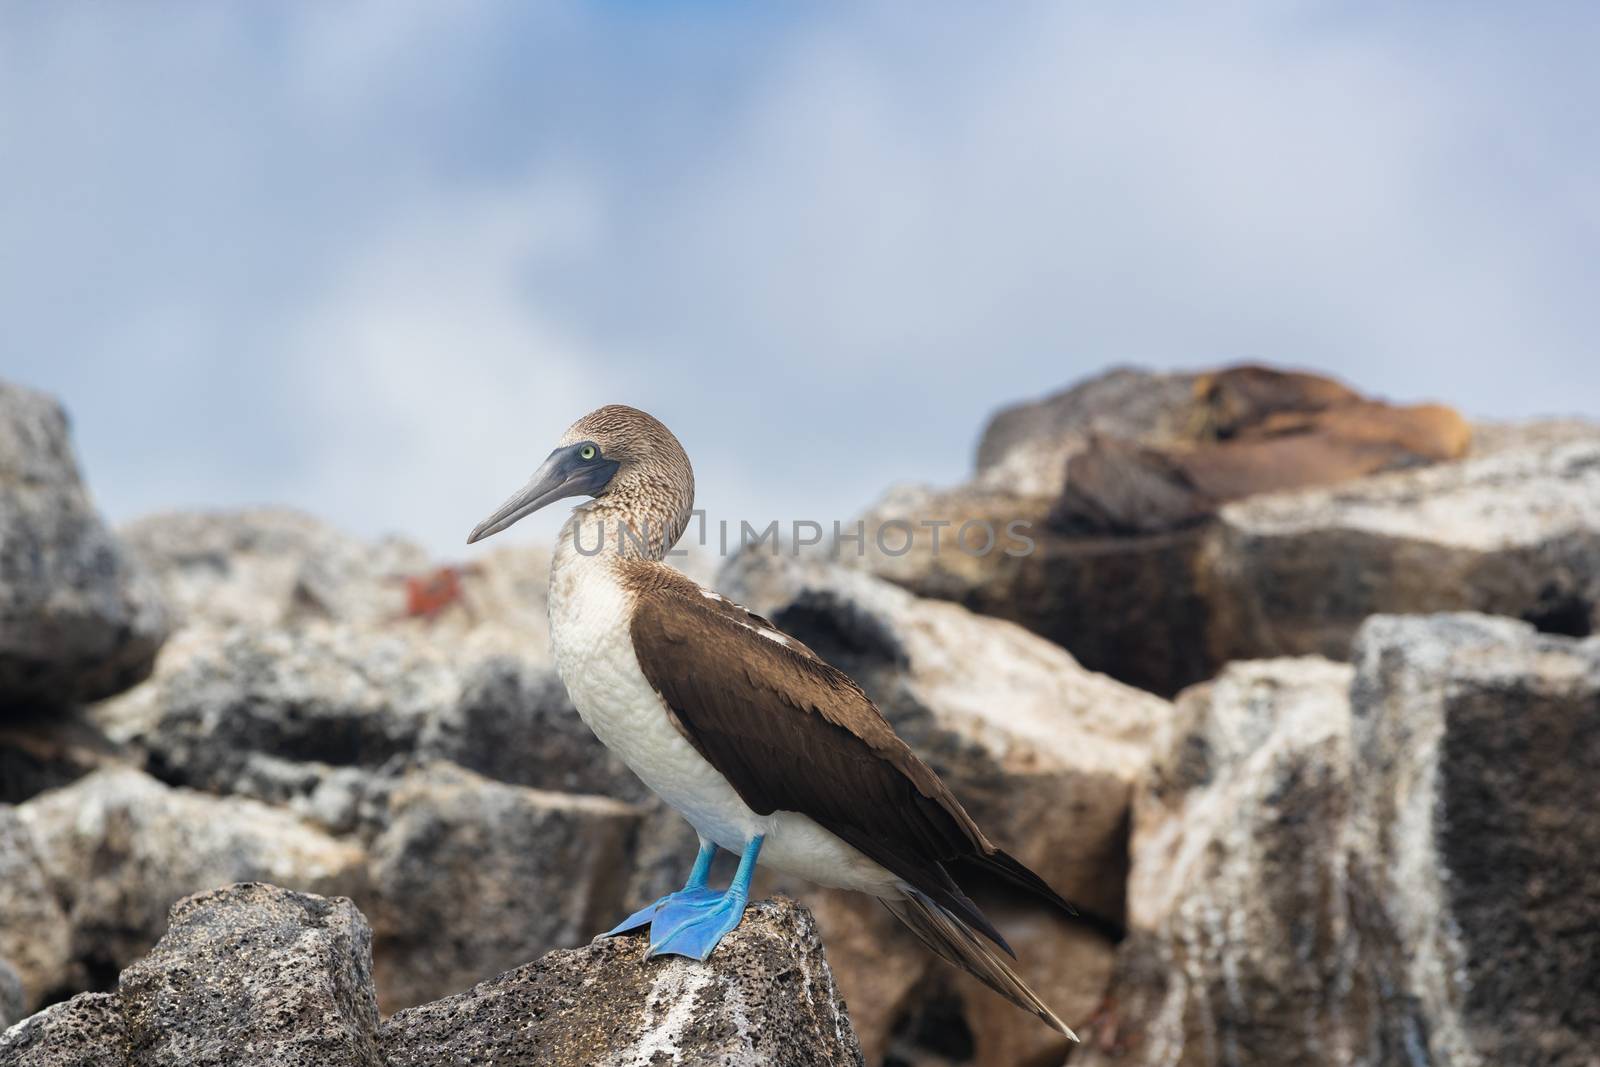 Galapagos animals: Blue-footed Booby - Iconic and famous galapagos animals and wildlife. Blue footed boobies are native to the Galapagos Islands, Ecuador, South America.